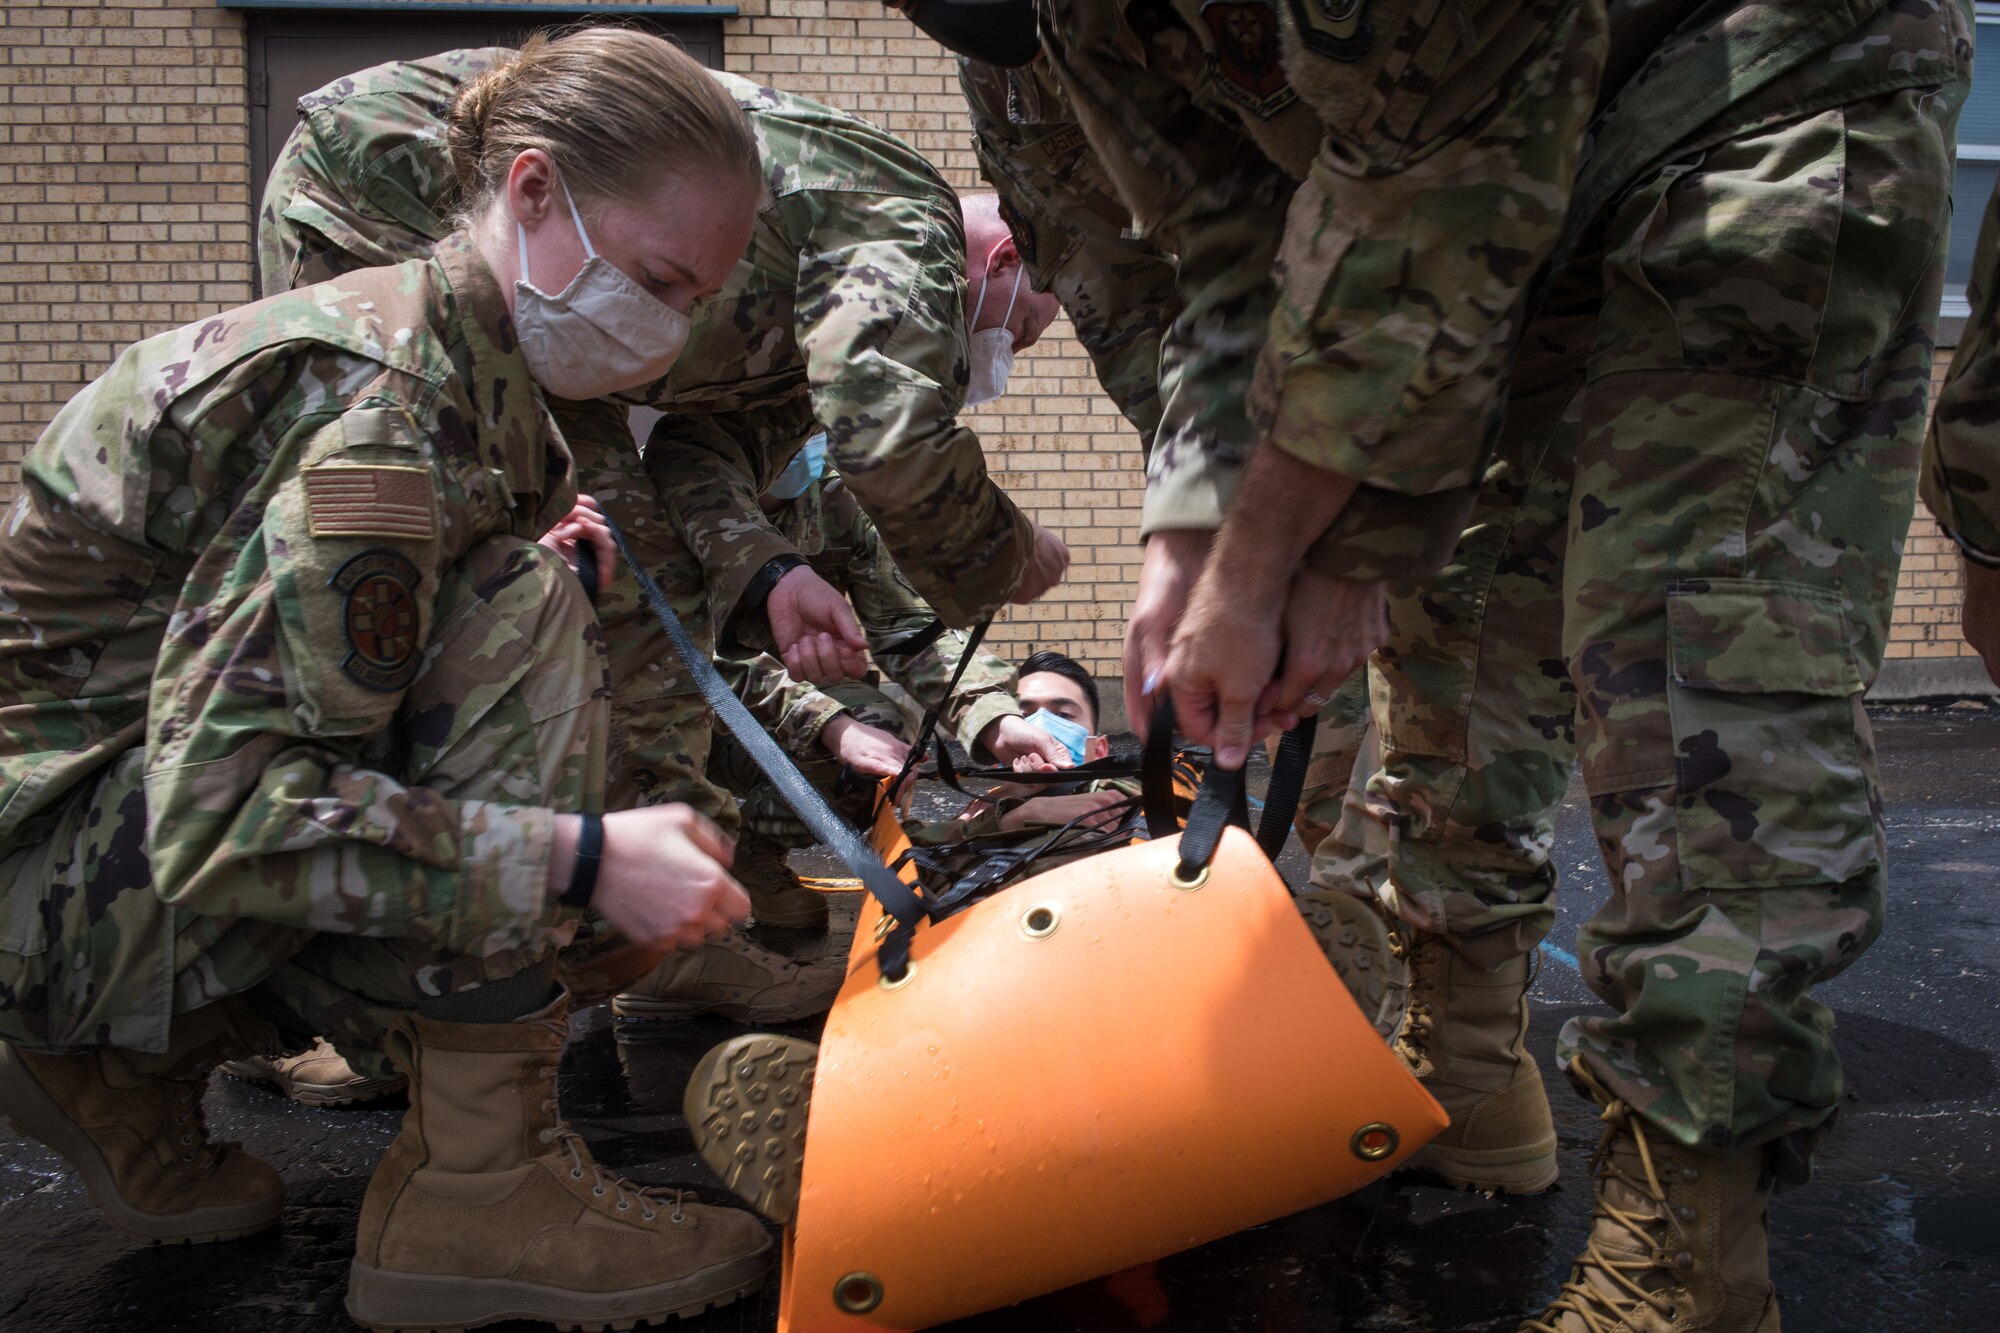 Airmen strap a simulated patient into a stretcher